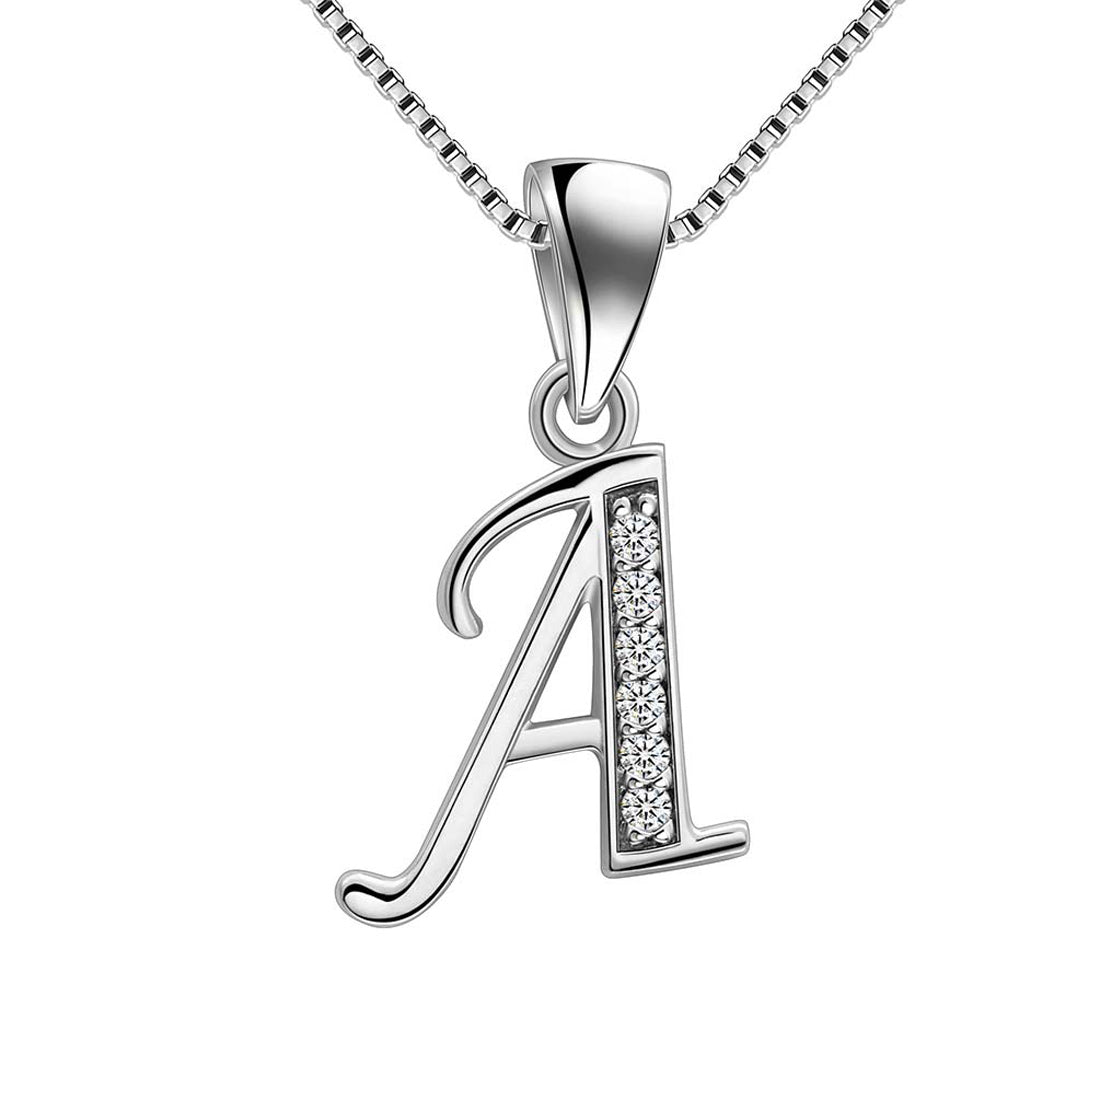 Letter A Initial Necklaces 925 Sterling Silver - Necklaces - Aurora Tears Jewelry